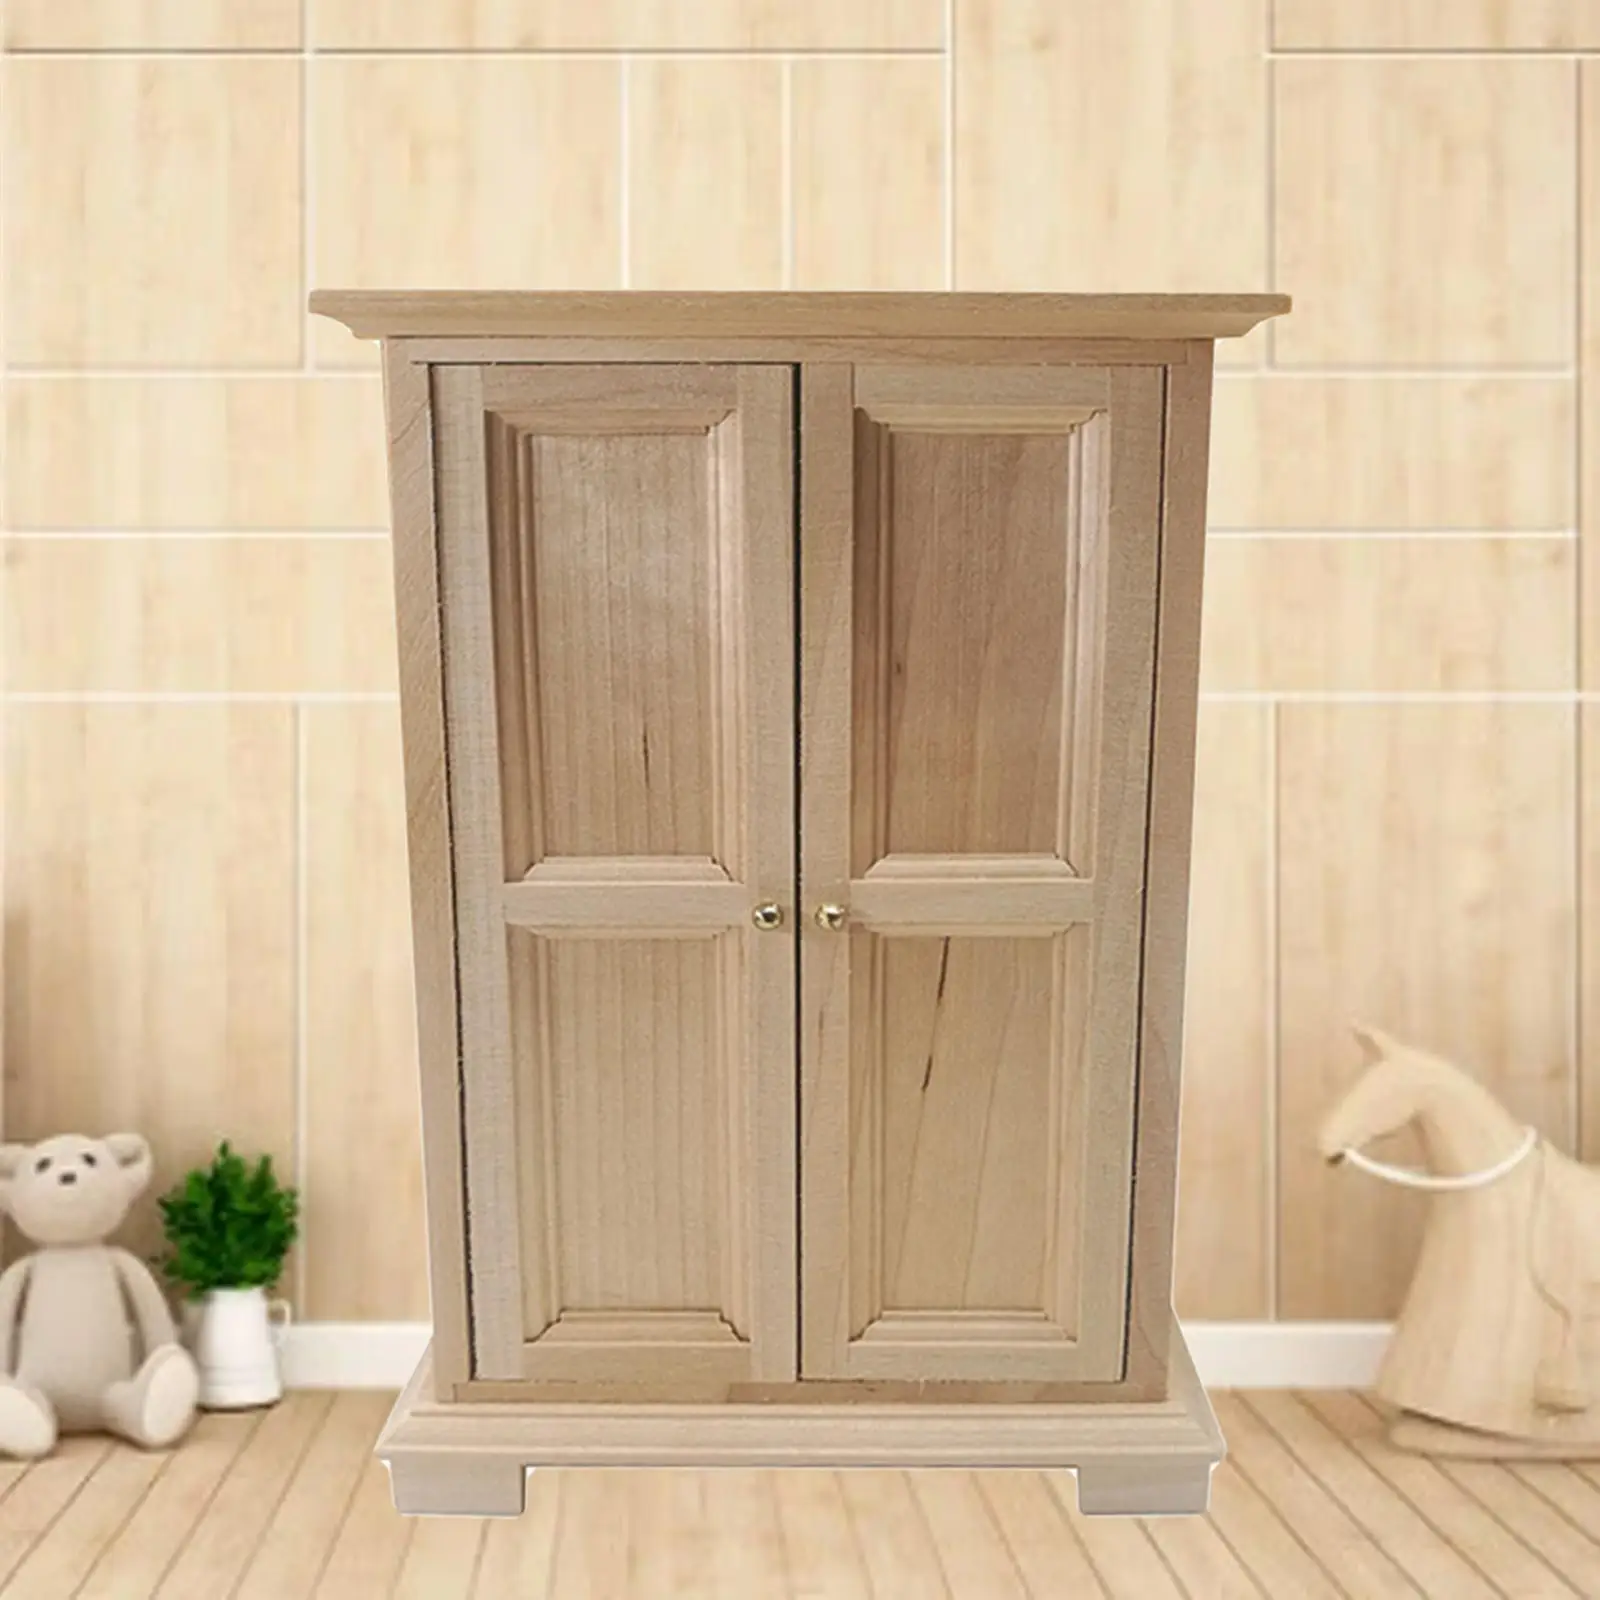 1:12 Dollhouse Wooden Wardrobe Vintage Cabinet for Doll House Bedroom Decor